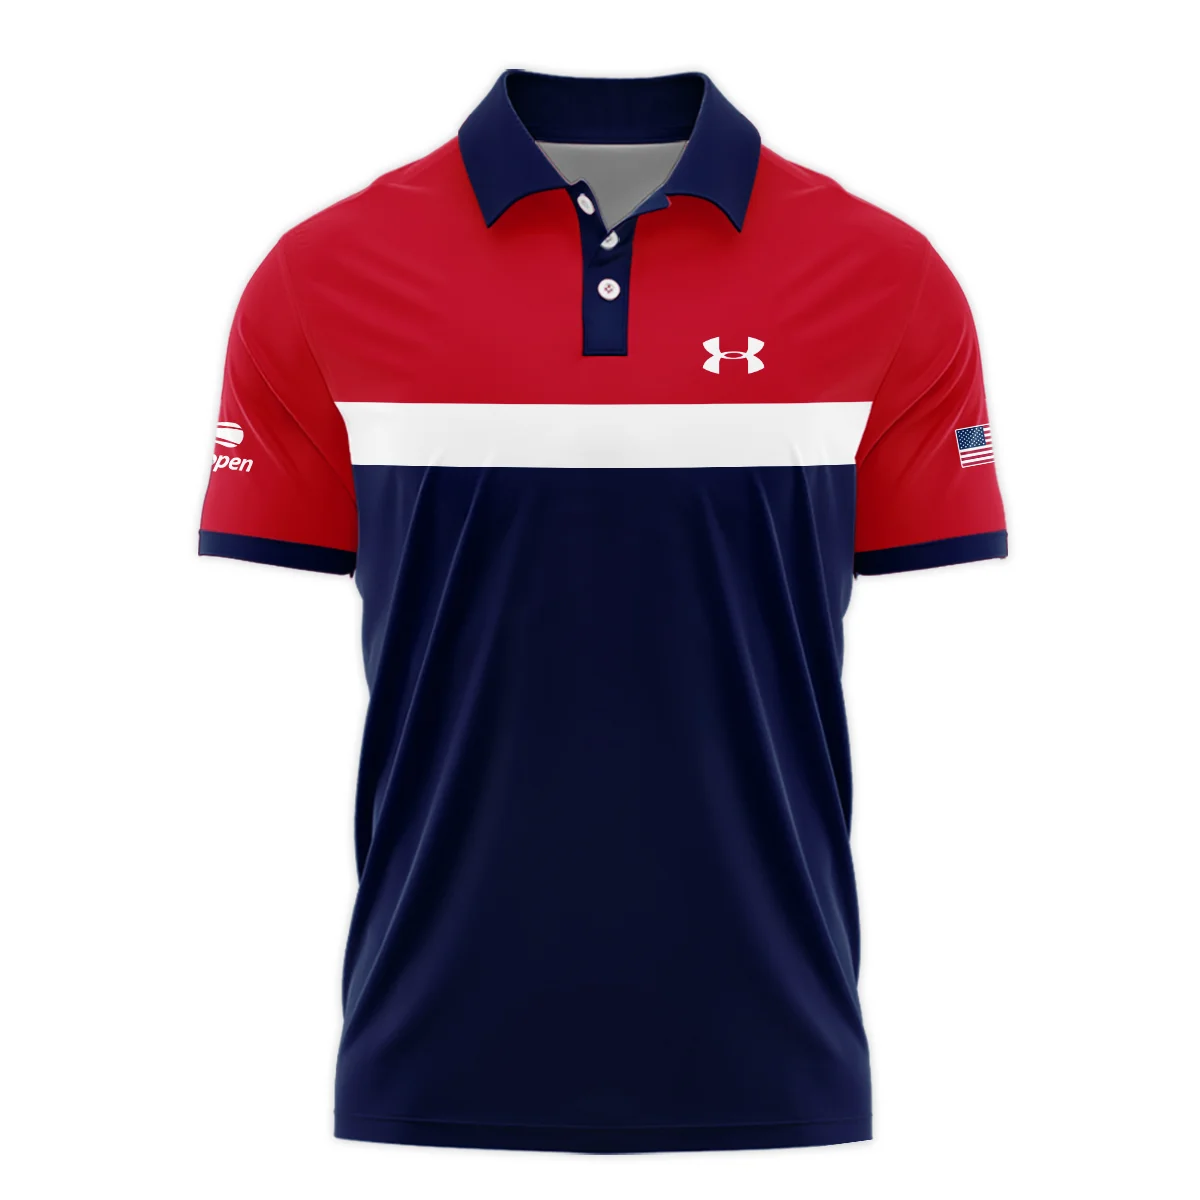 Under Armour Blue Red White Background US Open Tennis Champions Polo Shirt Style Classic Polo Shirt For Men